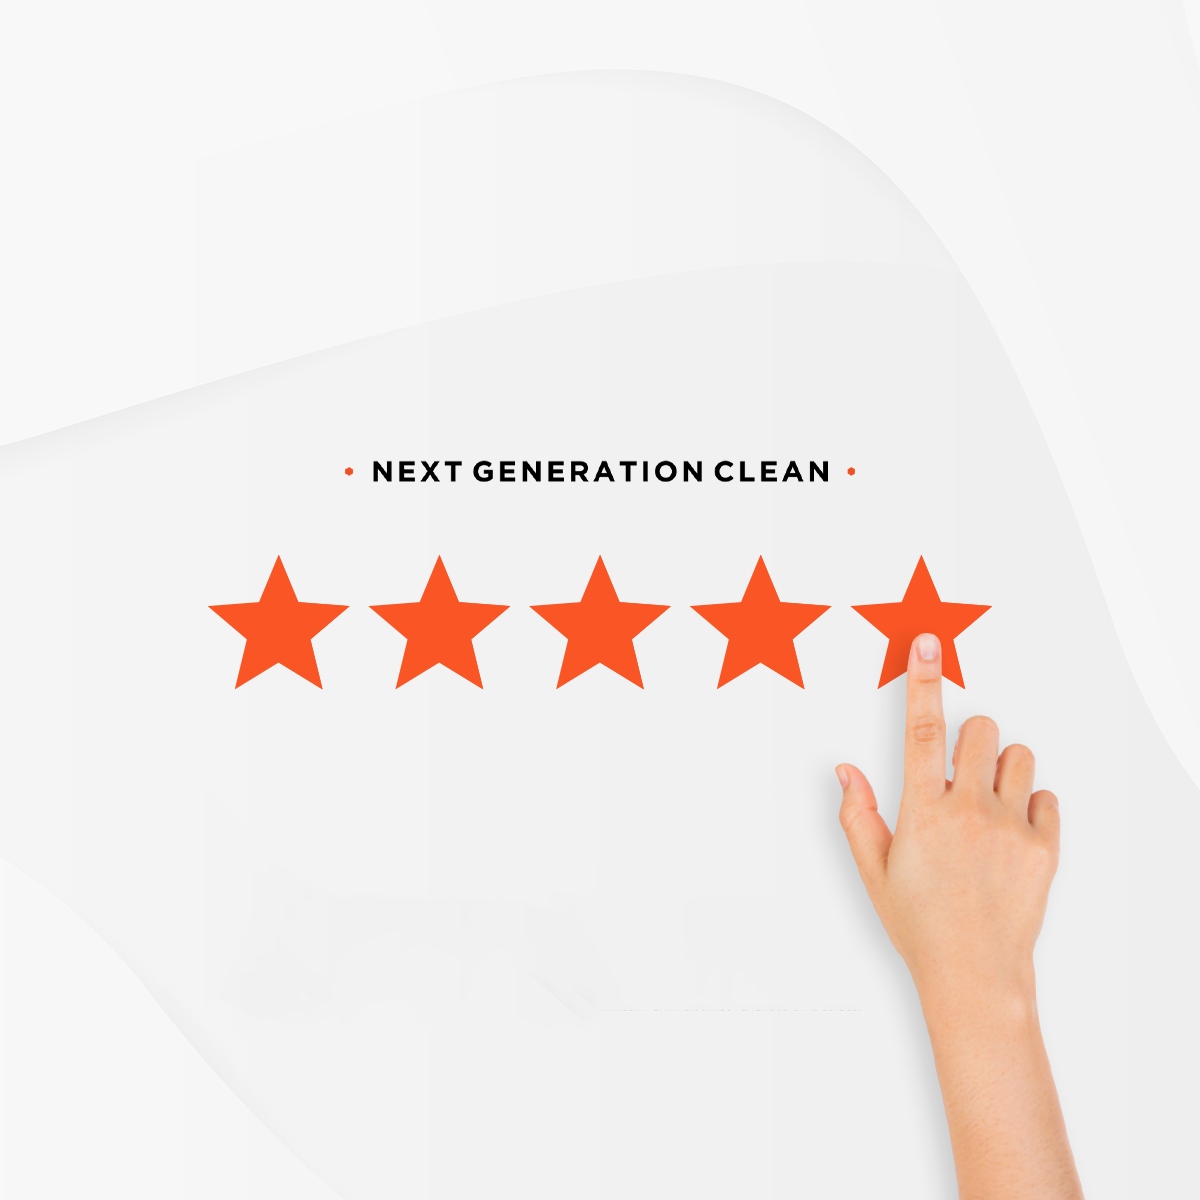 Don’t just take our word for it… There’s a reason people are giving us 5 stars!

#cleantech #techhygiene #cleantechnology #cleaningmotivation